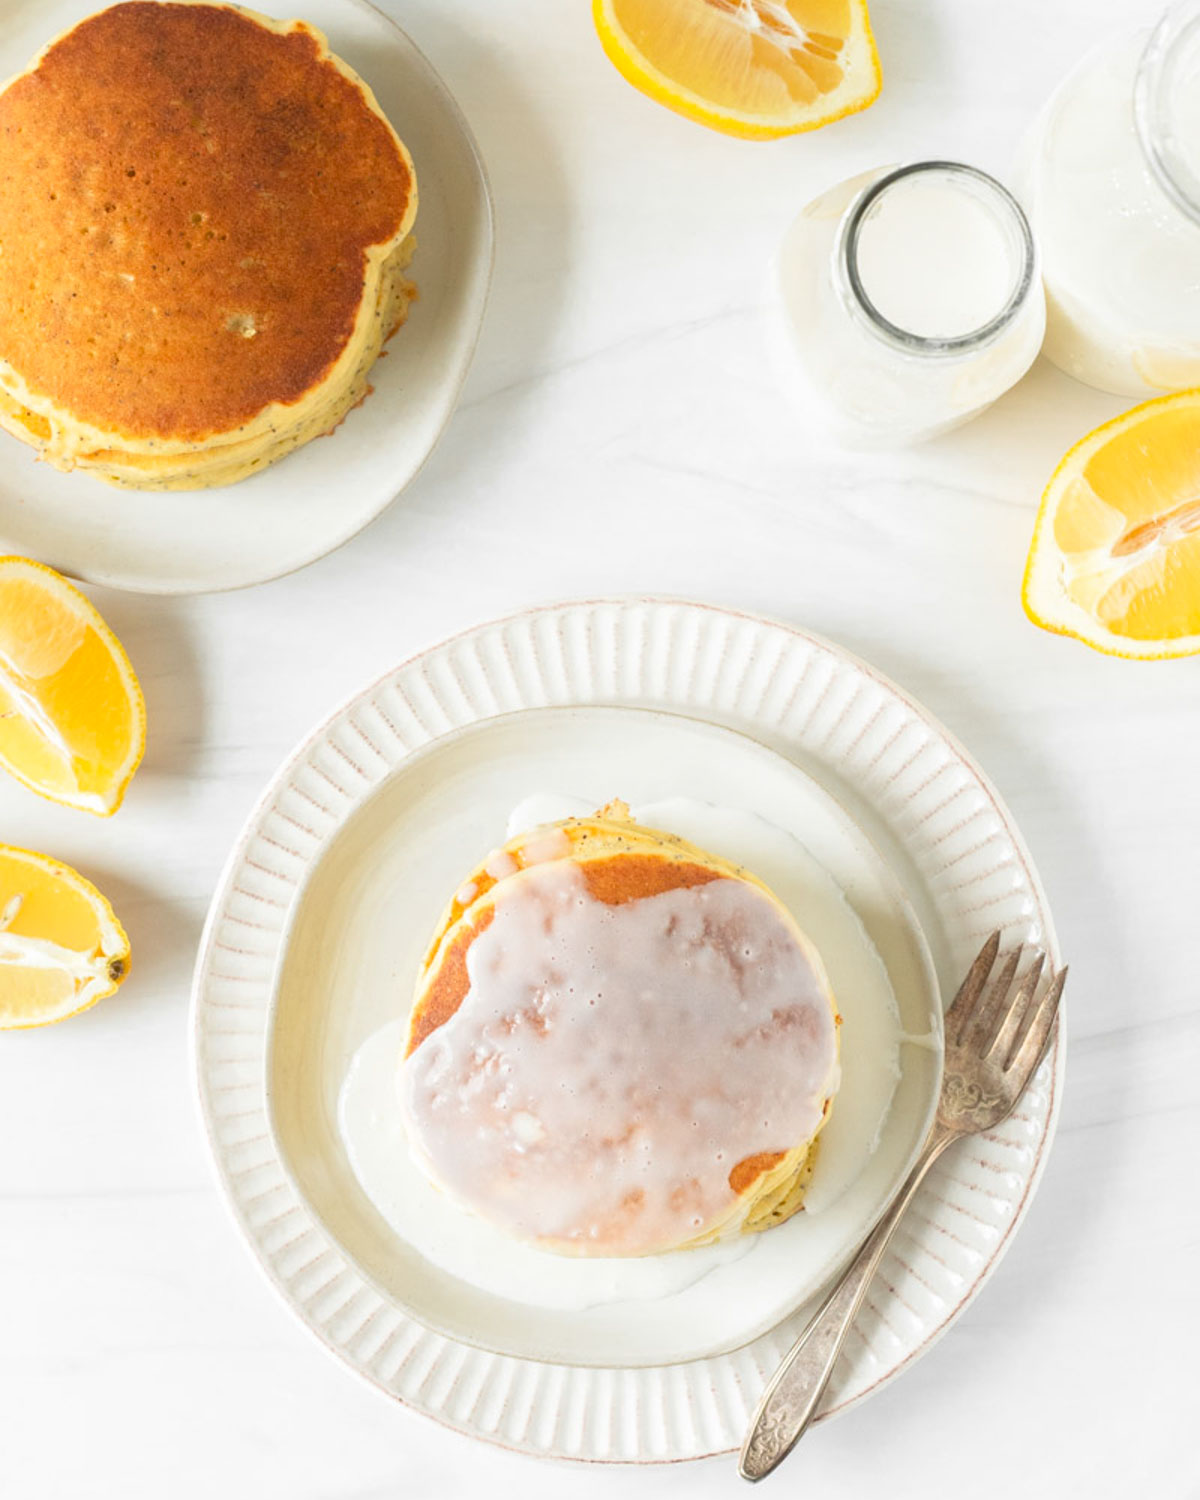 These lemon poppy seed pancakes are a fluffy, classic pancake filled with fresh lemon juice and poppy seeds for a delicious spring breakfast.